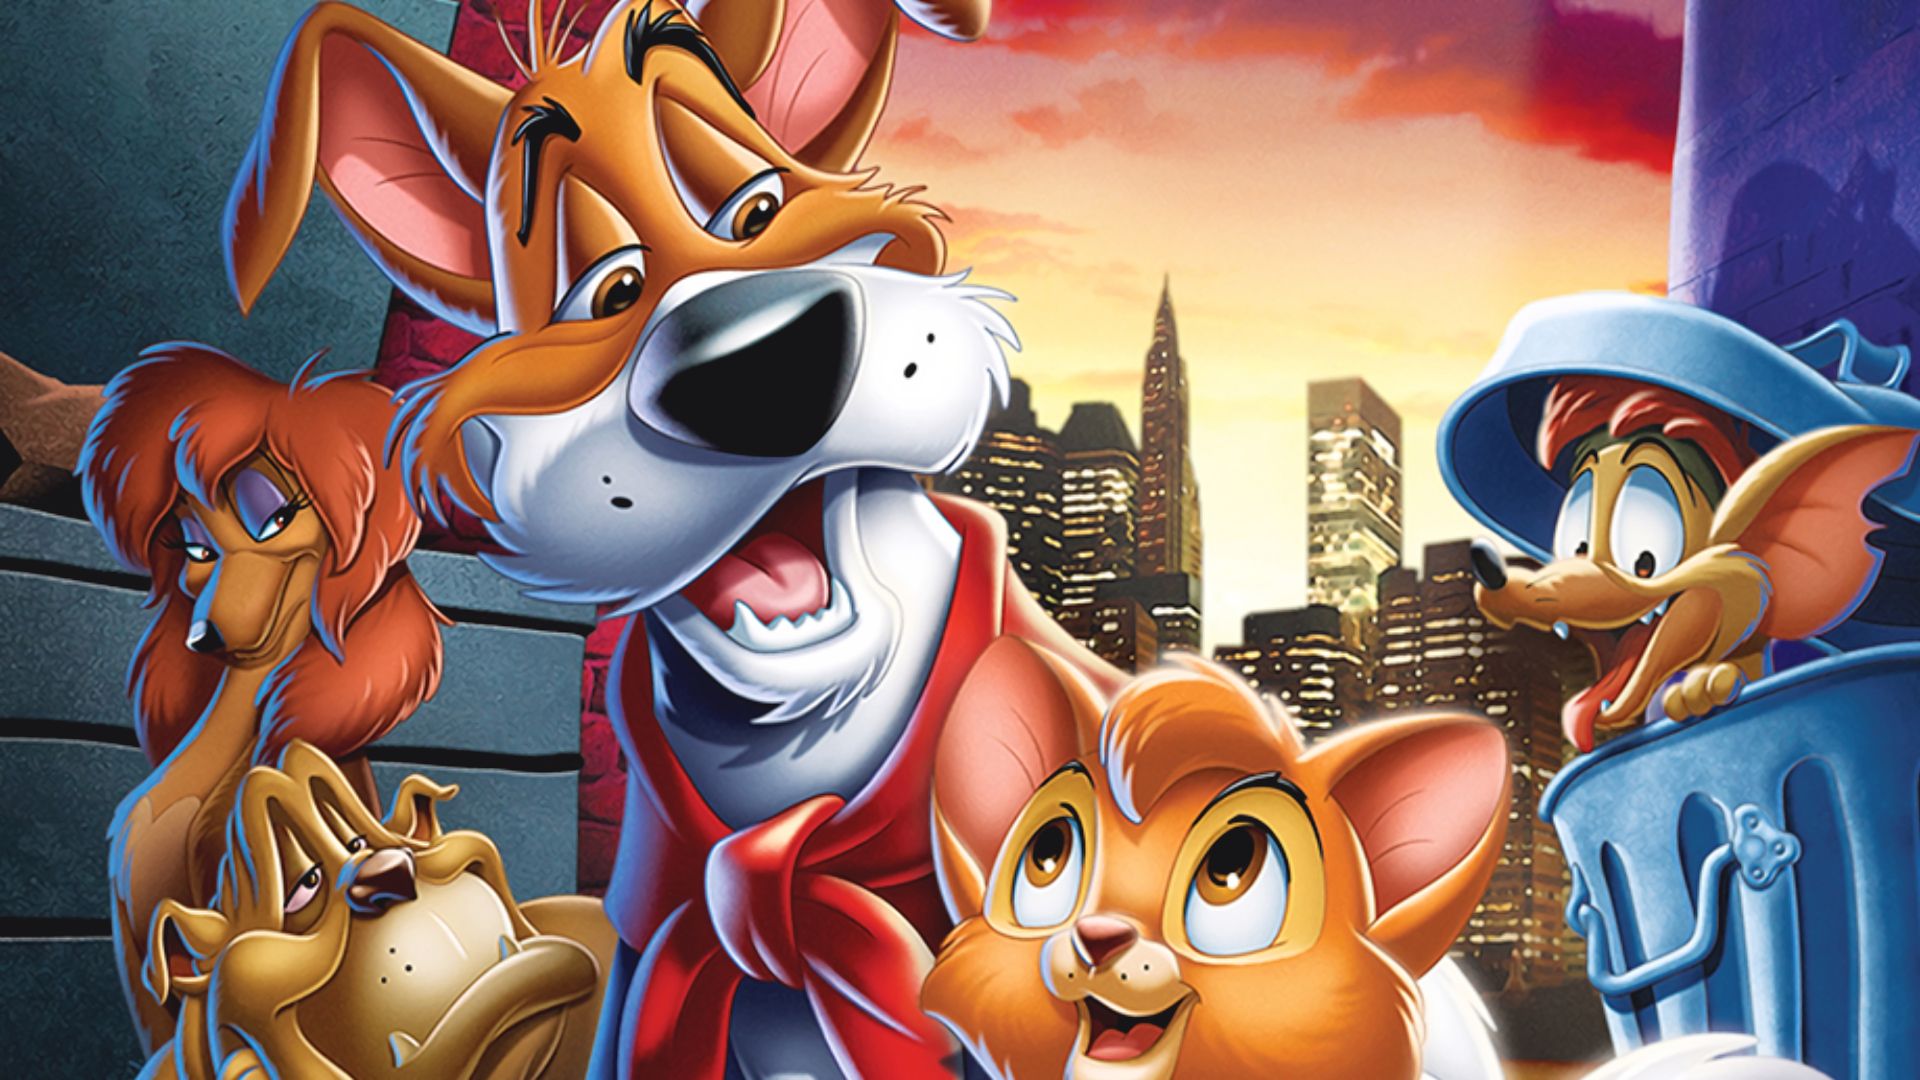 100+] Oliver And Company Wallpapers